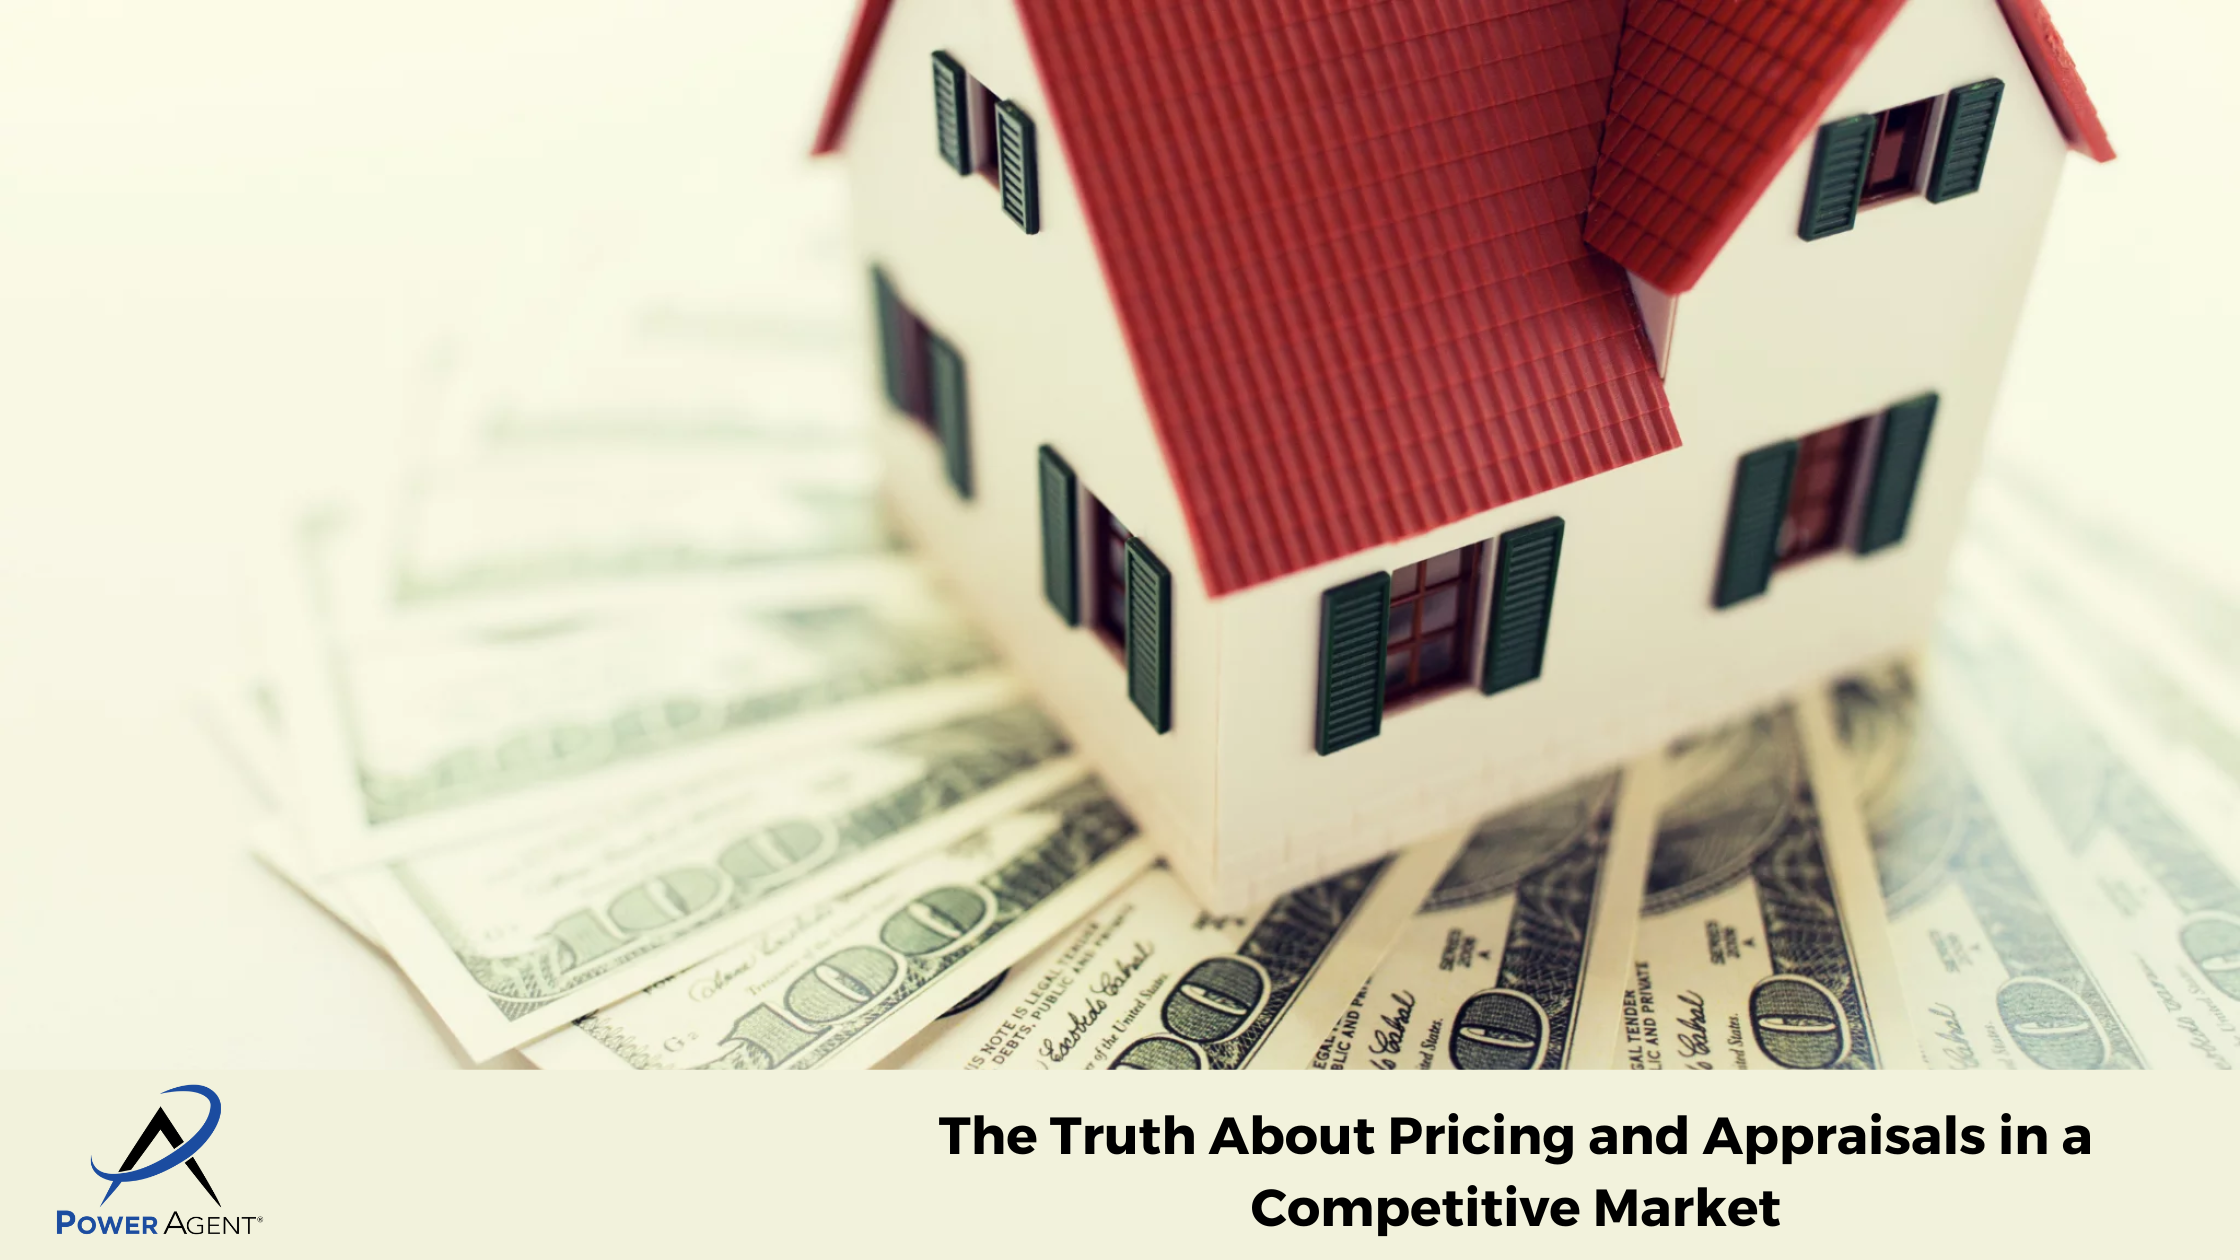 The Truth About Pricing and Appraisals in a Competitive Market